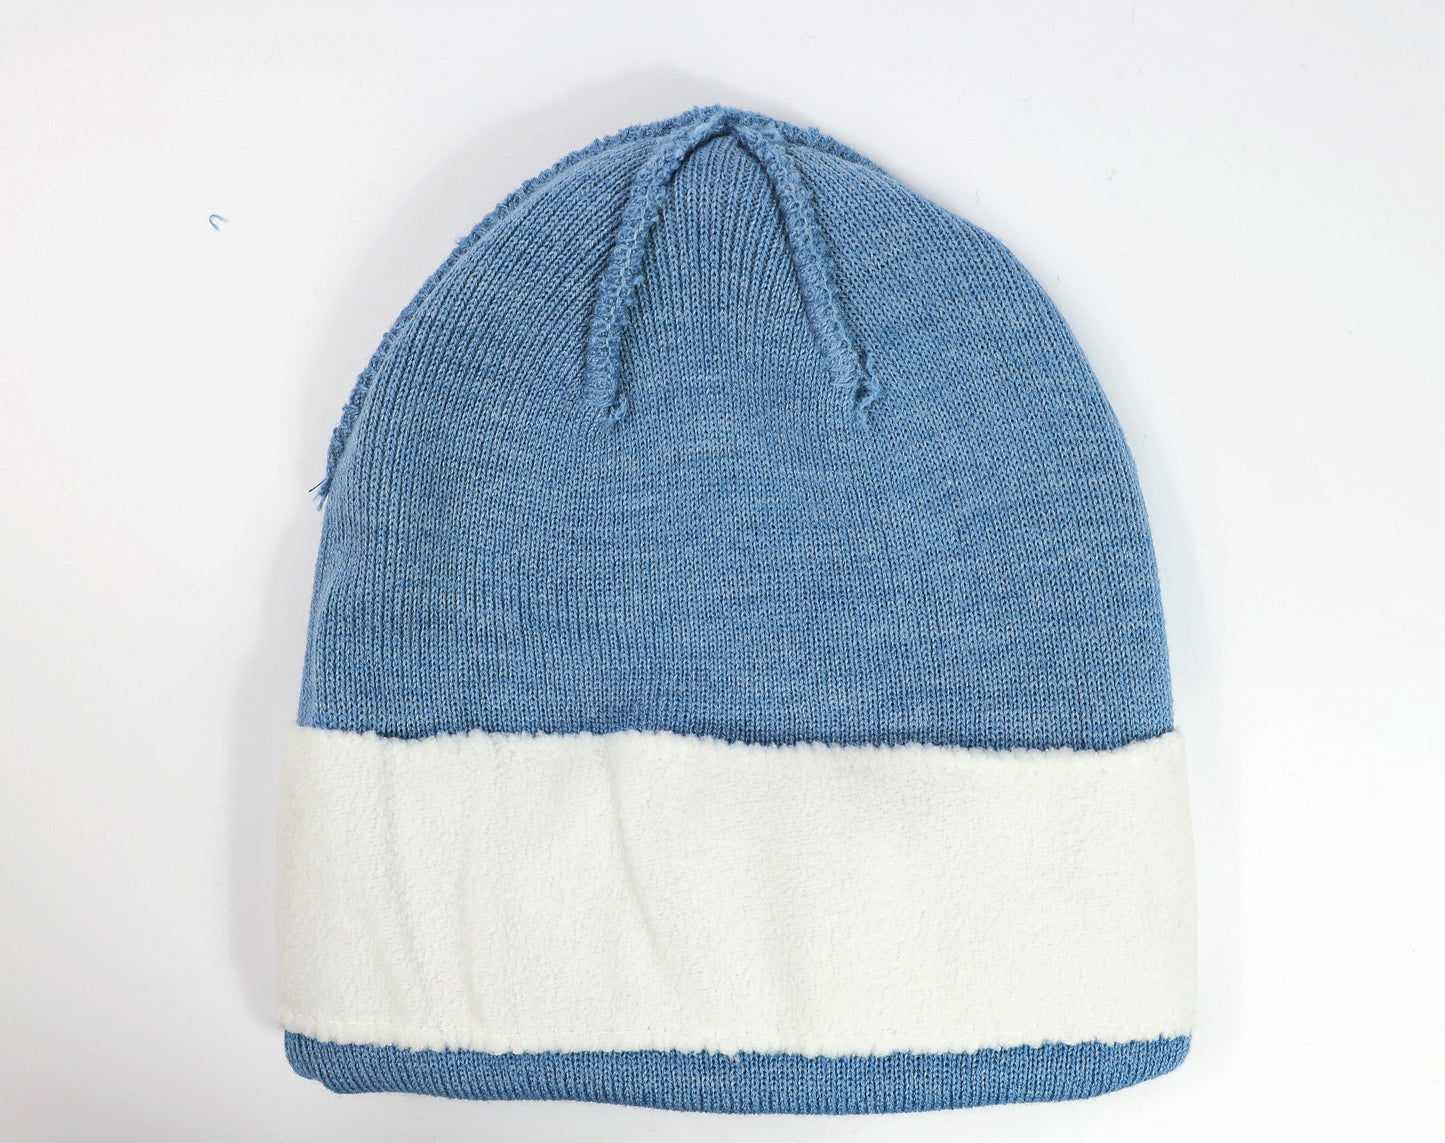 Acrylic 2PLY Knitted Beanie with Microfleece Lining